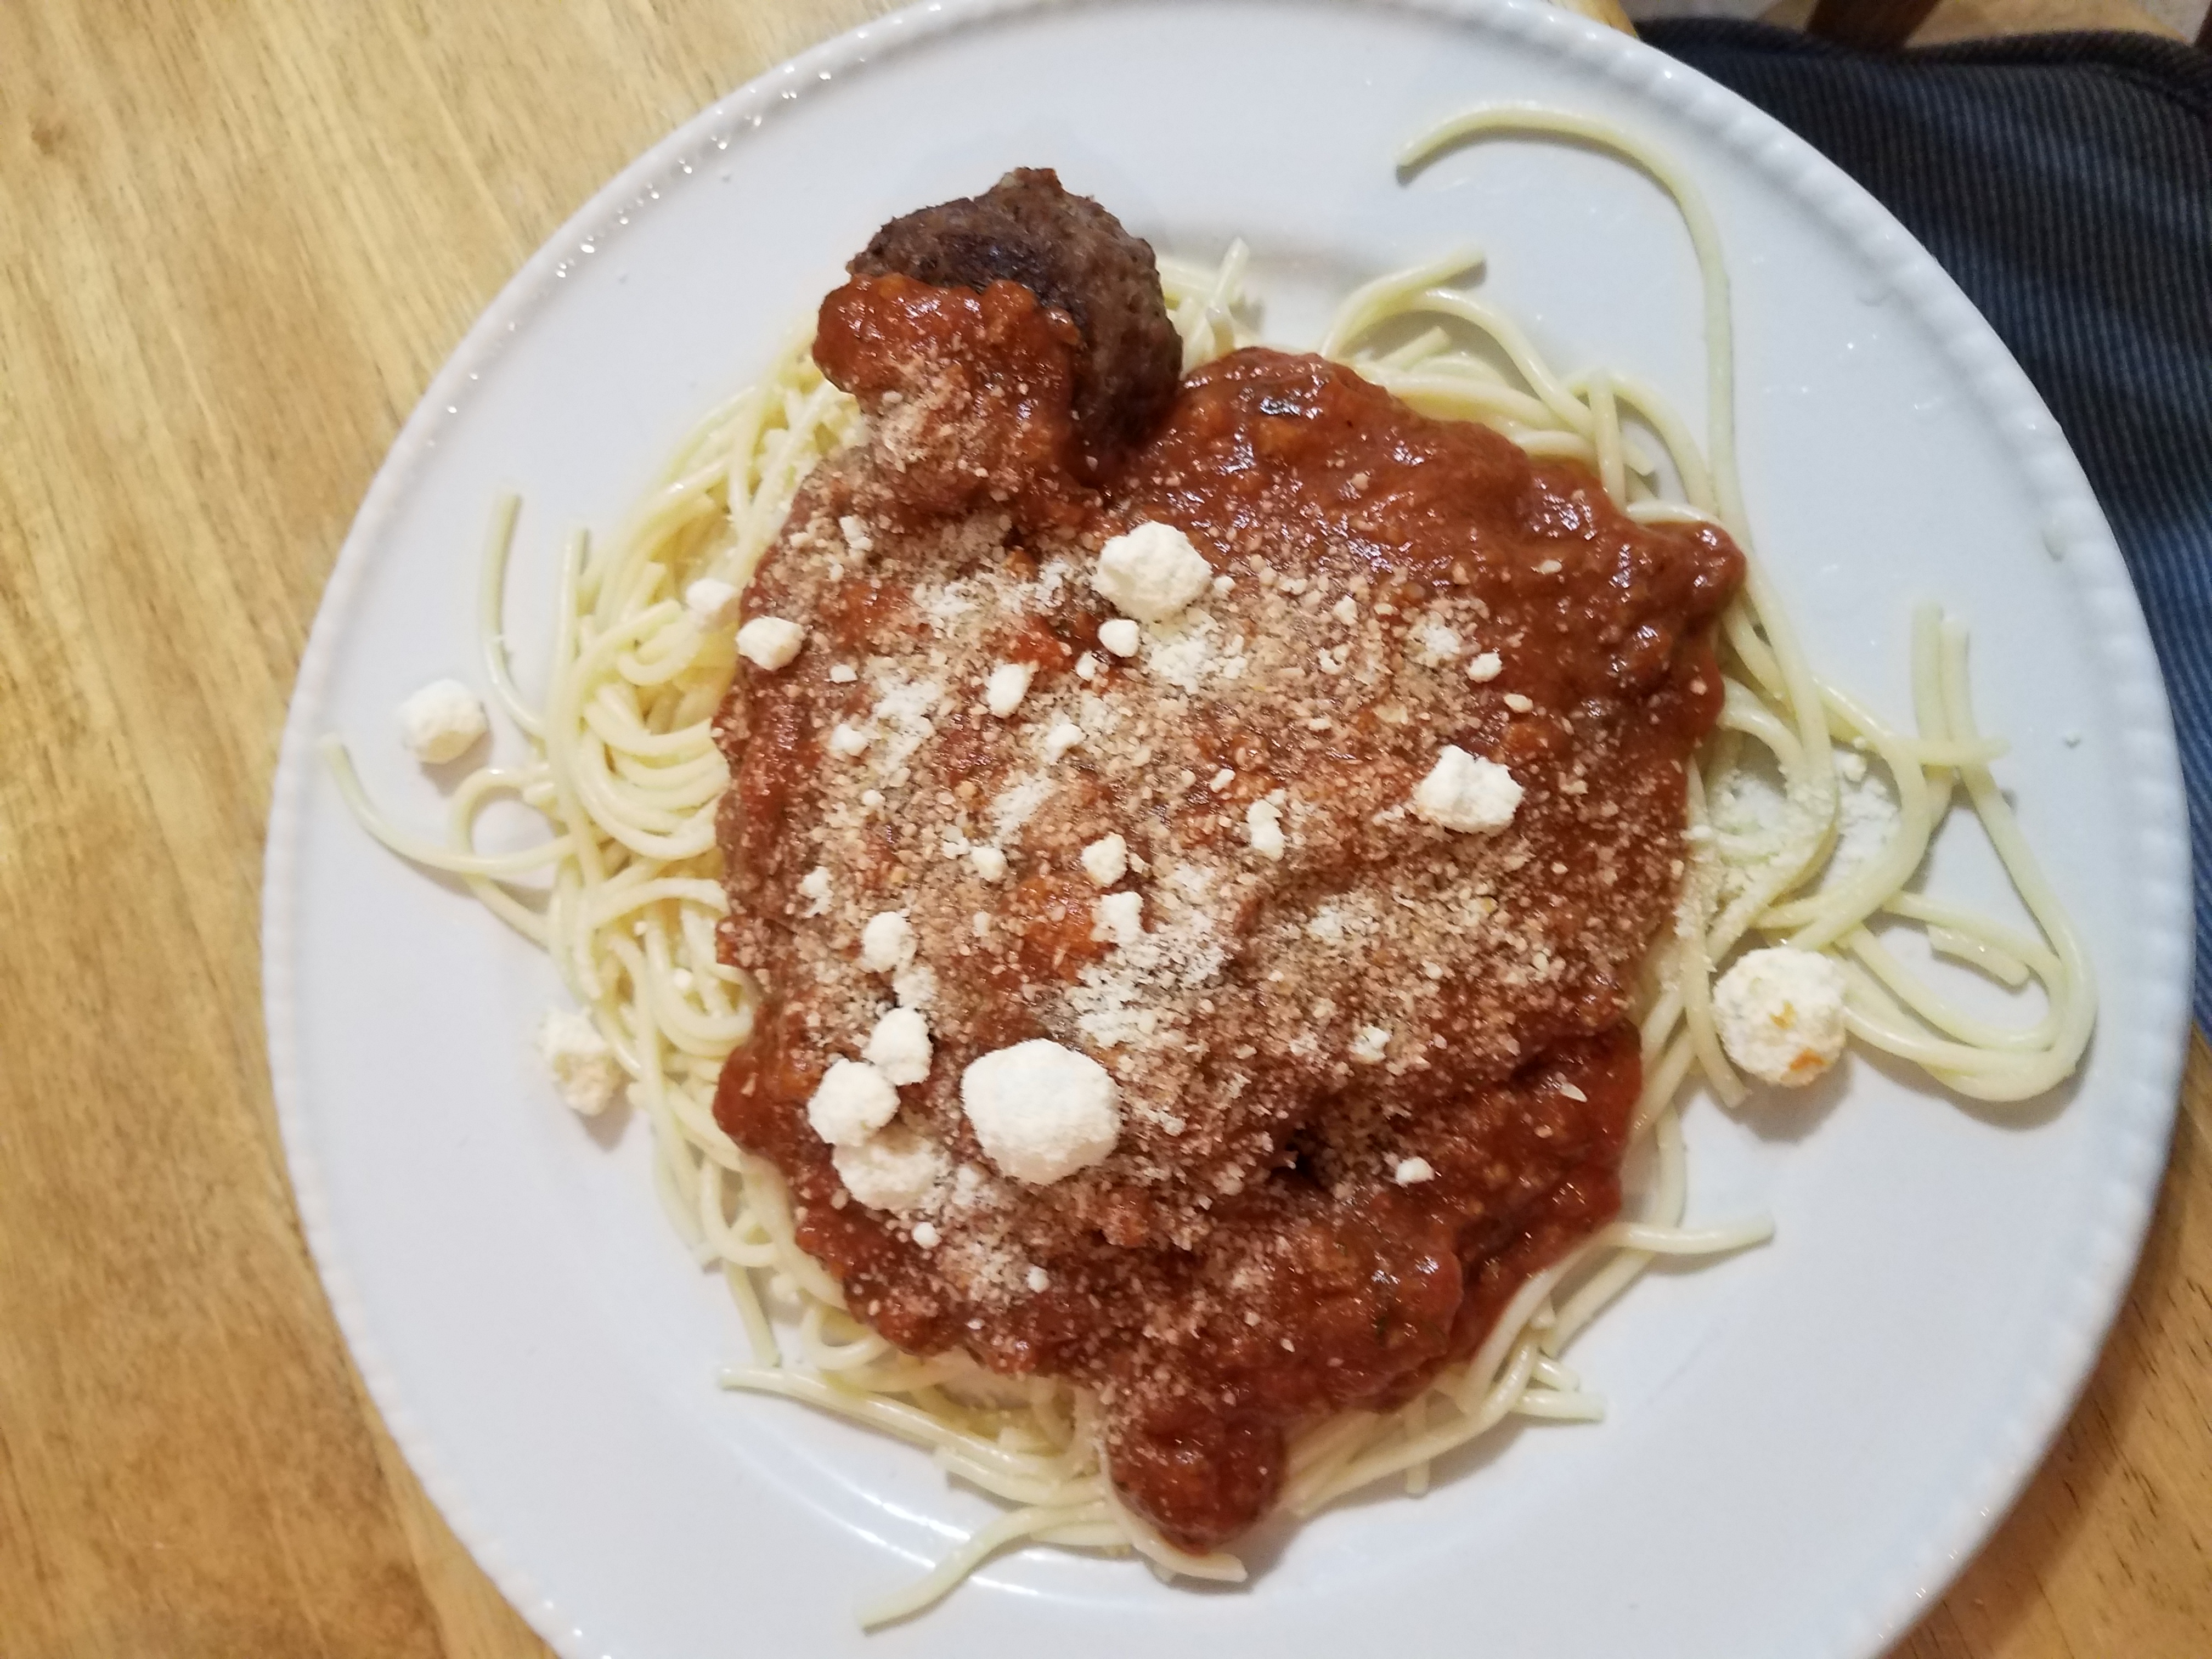 Toby's Spaghetti Extravaganza! With Meat balls